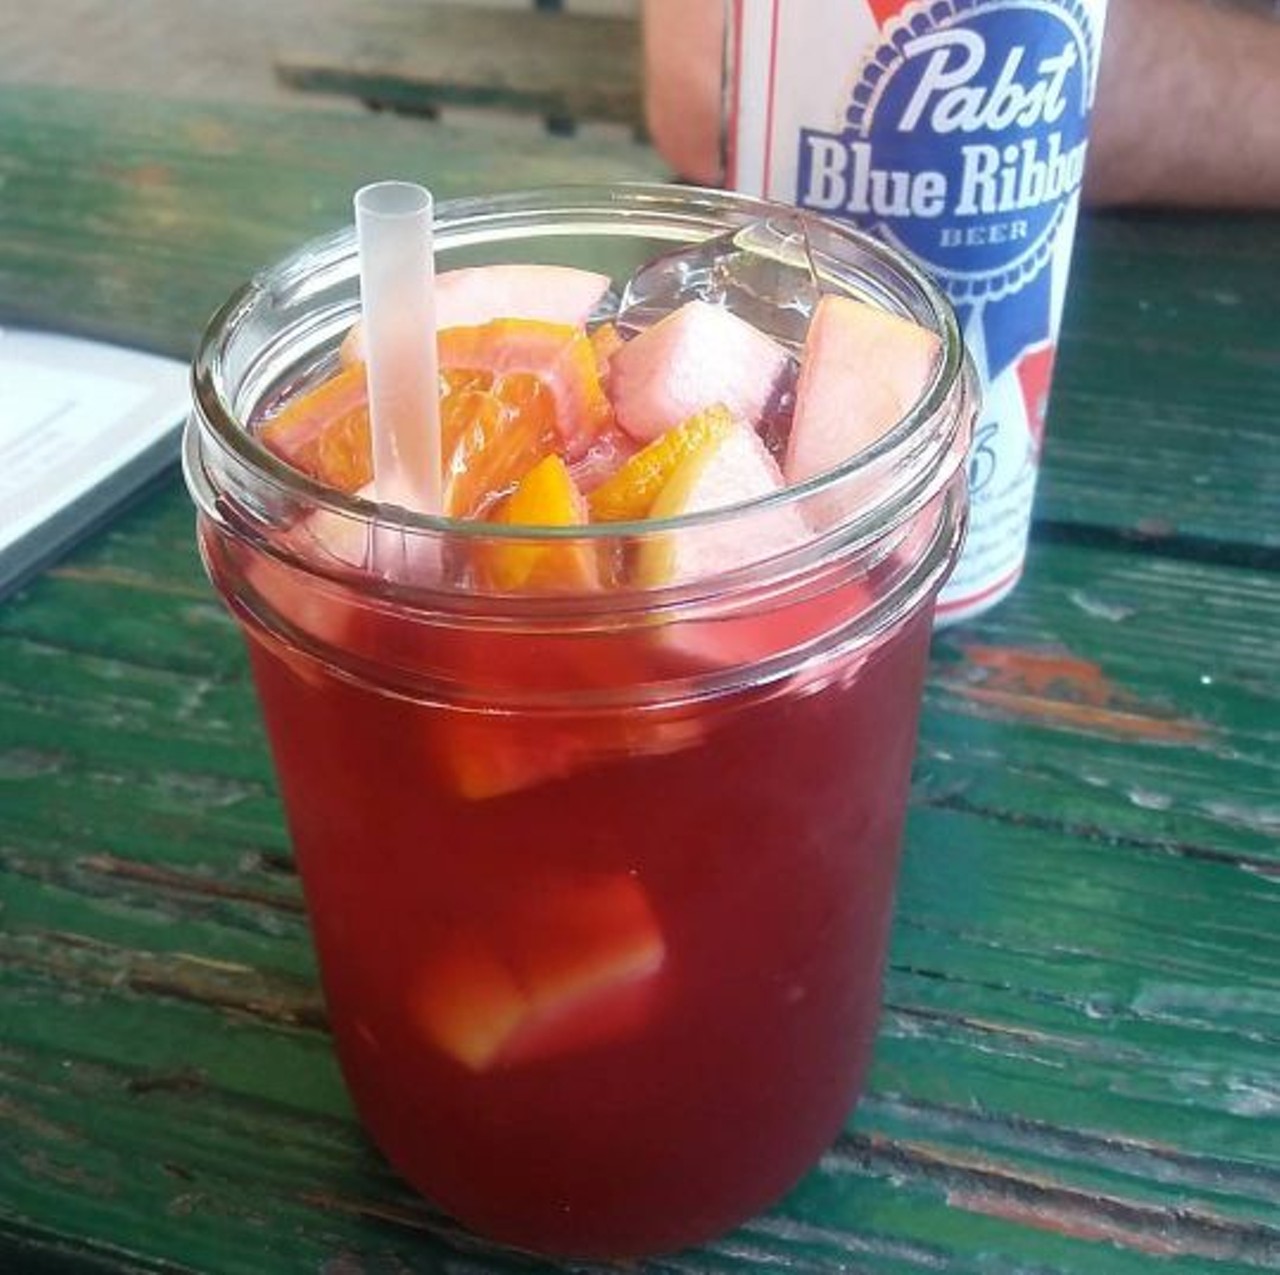 Tycoon Flats 
2926 N. St. Mary&#146;s St., (210) 320-0819 
Visit this cute beer garden on Saturdays for $2.50 sangria. It&#146;s a drink and deal that you won&#146;t want to miss. 
Photo via Instagram, christinewojo